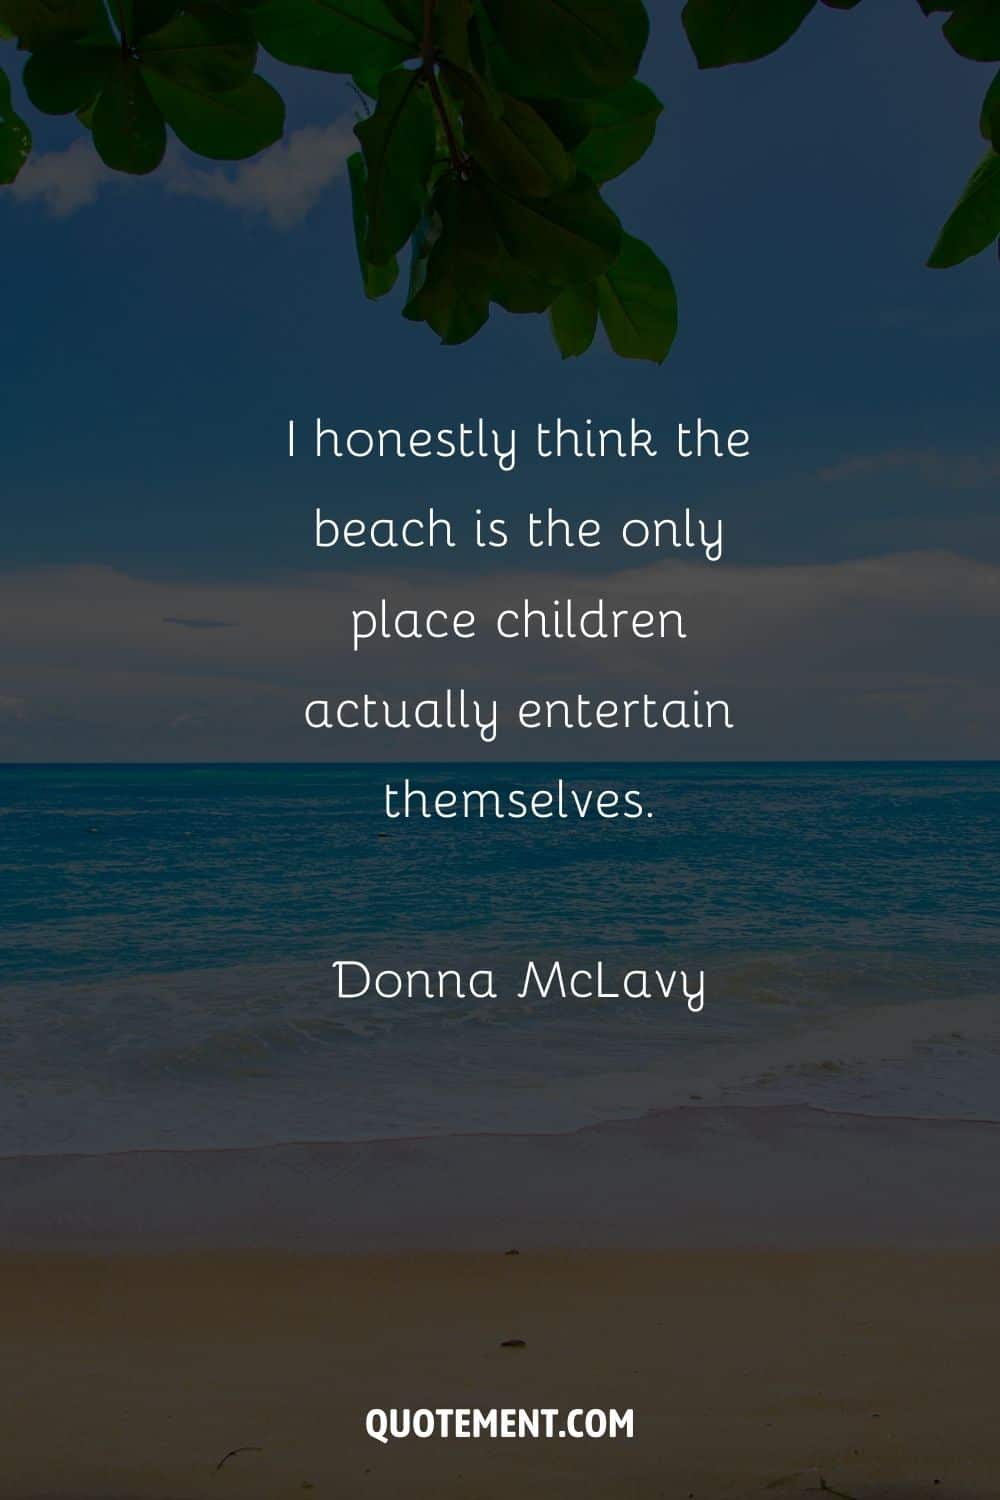 I honestly think the beach is the only place children actually entertain themselves. – Donna McLavy